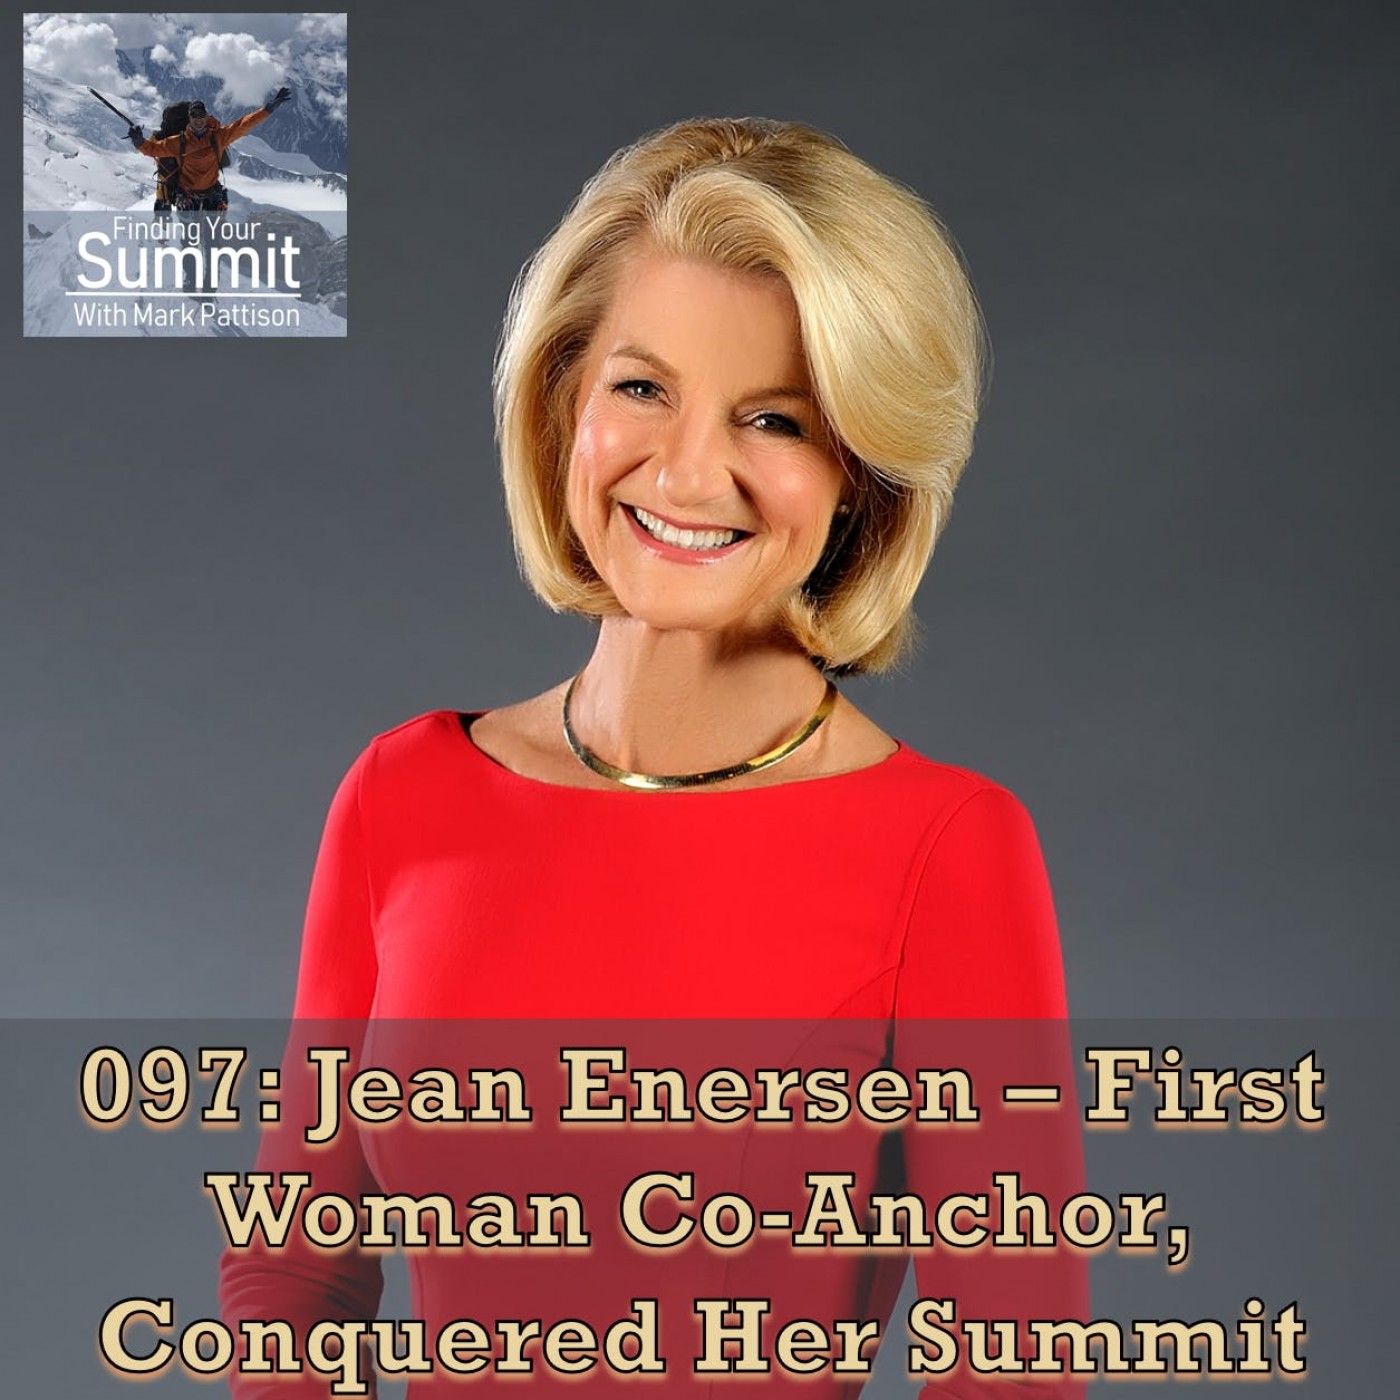 Jean Enersen – First Woman Co-Anchor, Conquered Her Summit